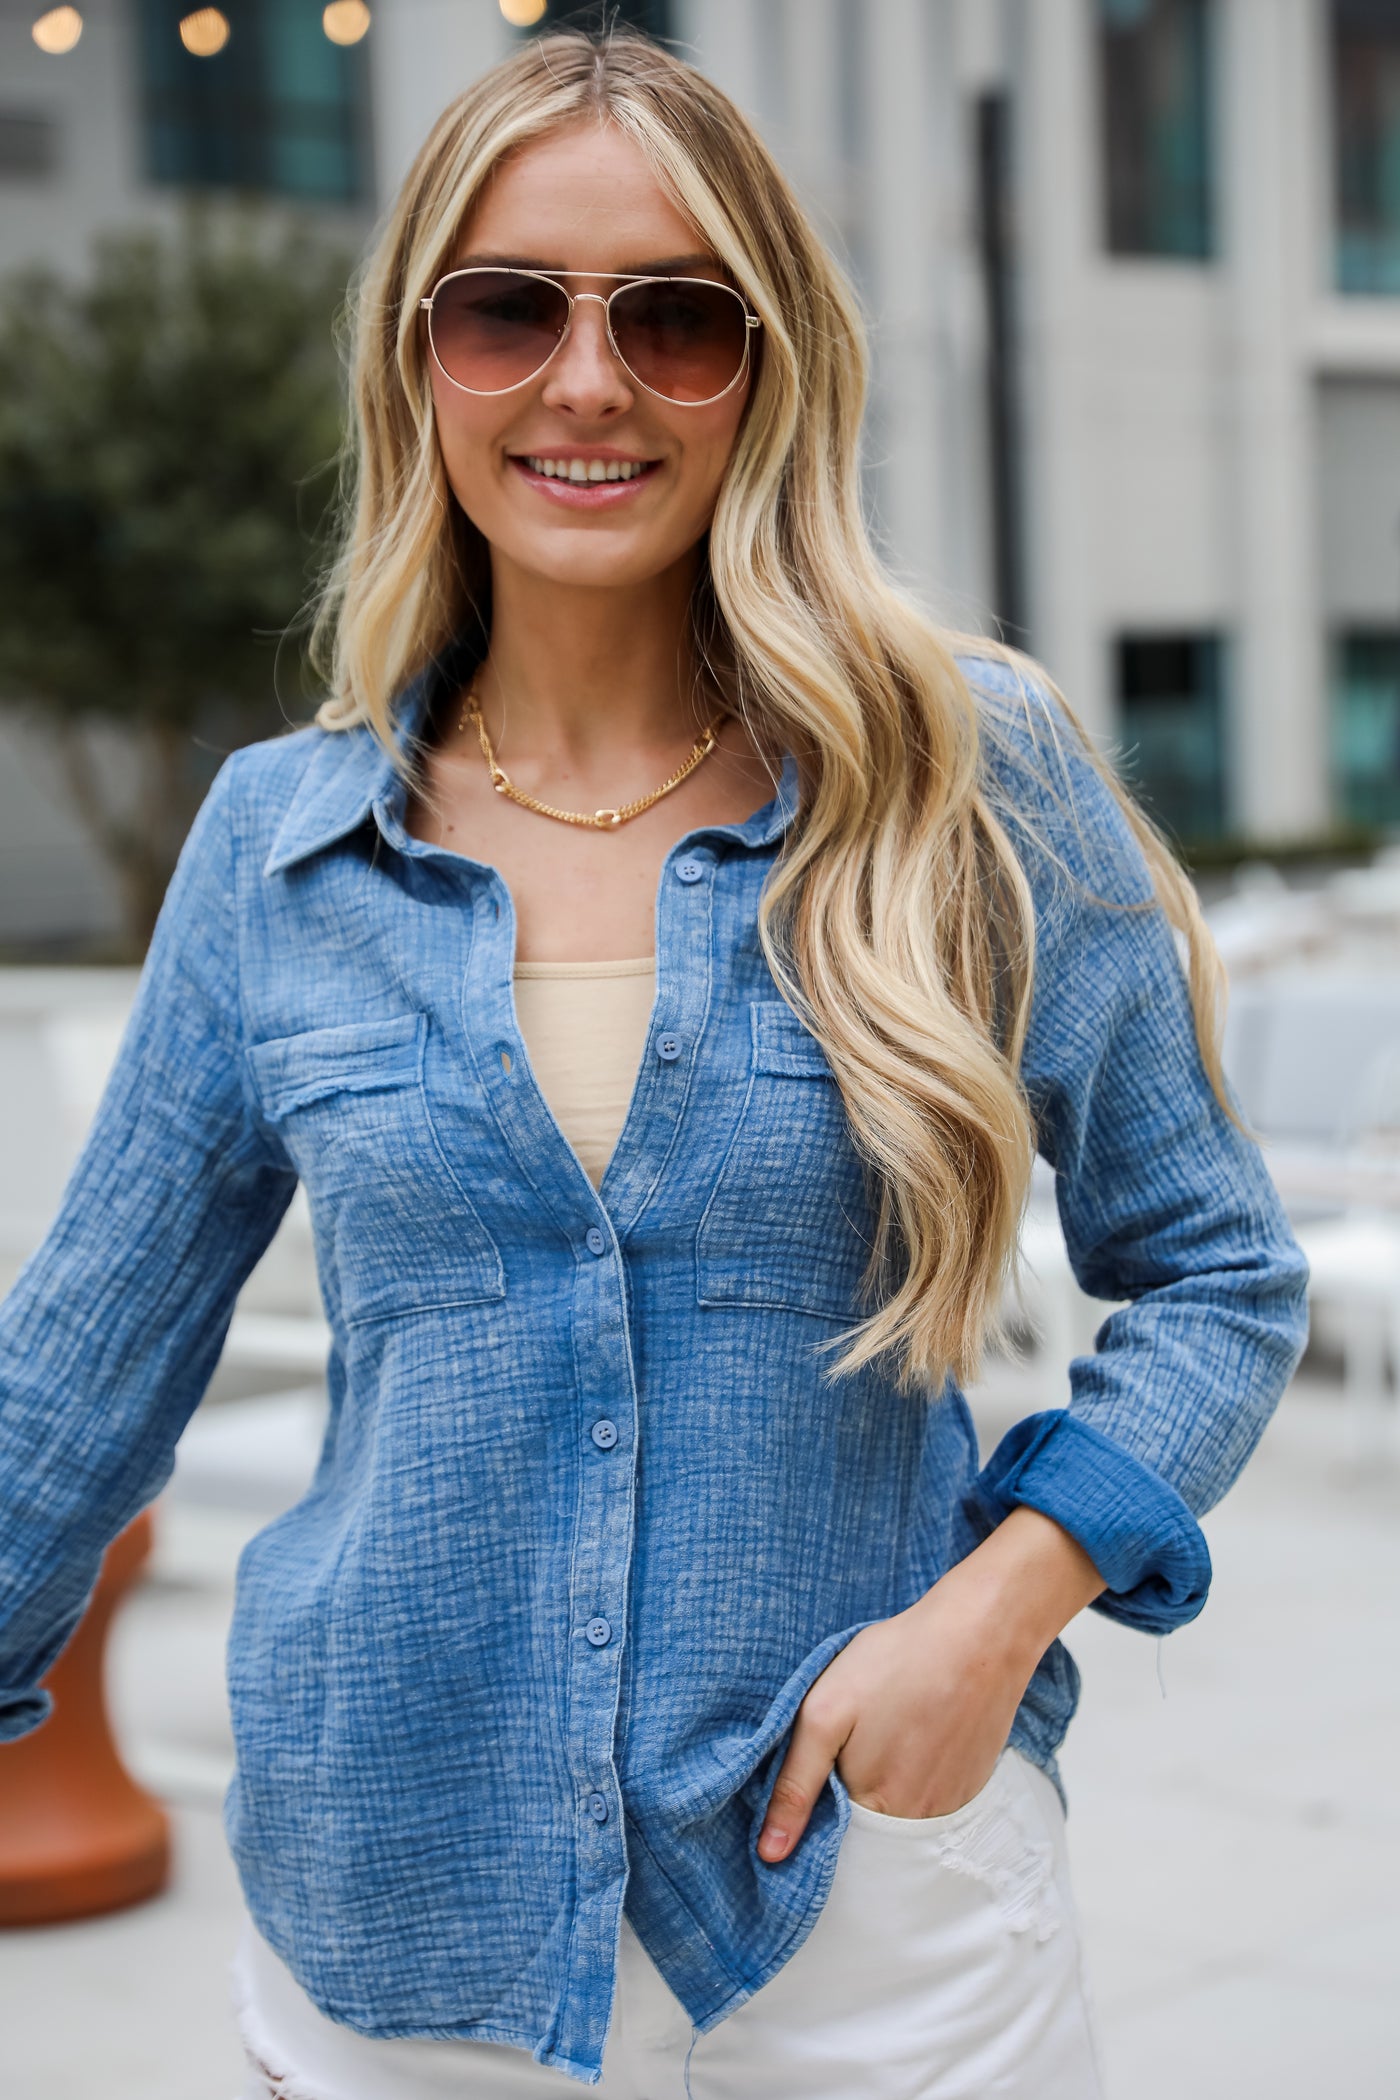 Morgan Denim Linen Button-Up Blouse features, Lightweight Crinkle Linen Fabrication, Acid Washed, Collared Neckline, Functional Button Front long Sleeves with Functional Button Cuffs